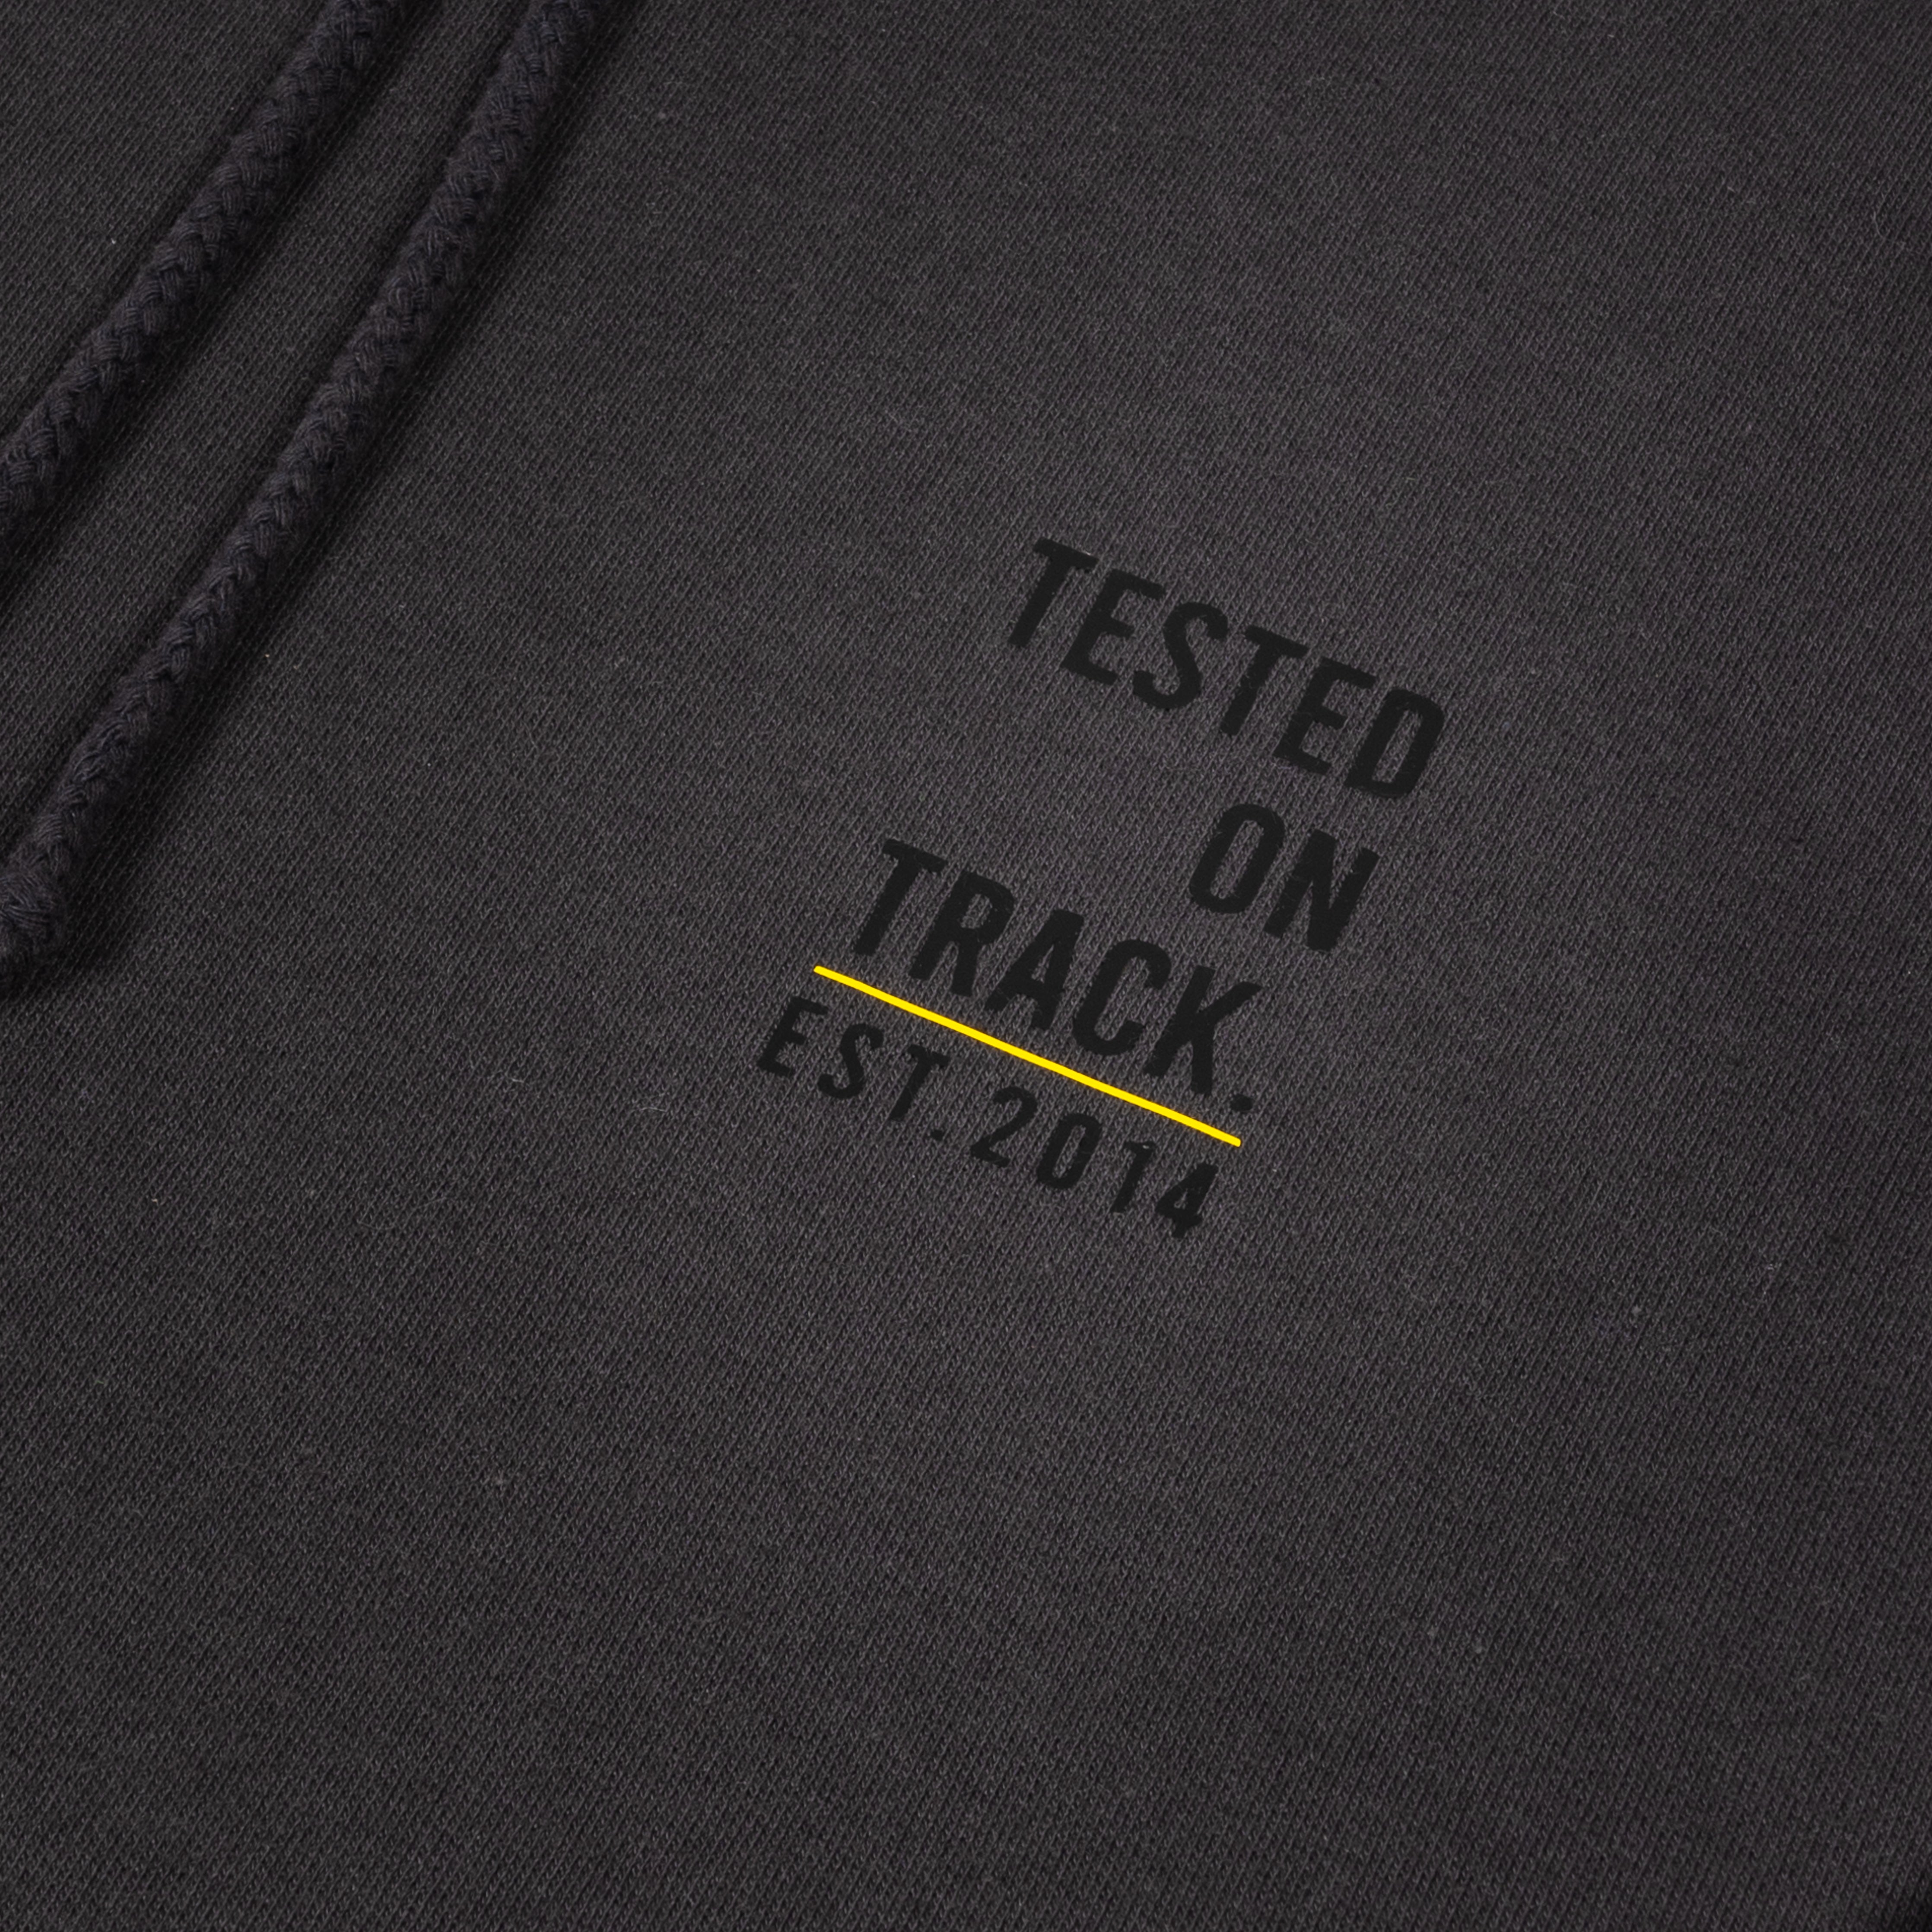 TESTED ON TRACK - LIMITED EDITION HOODIE